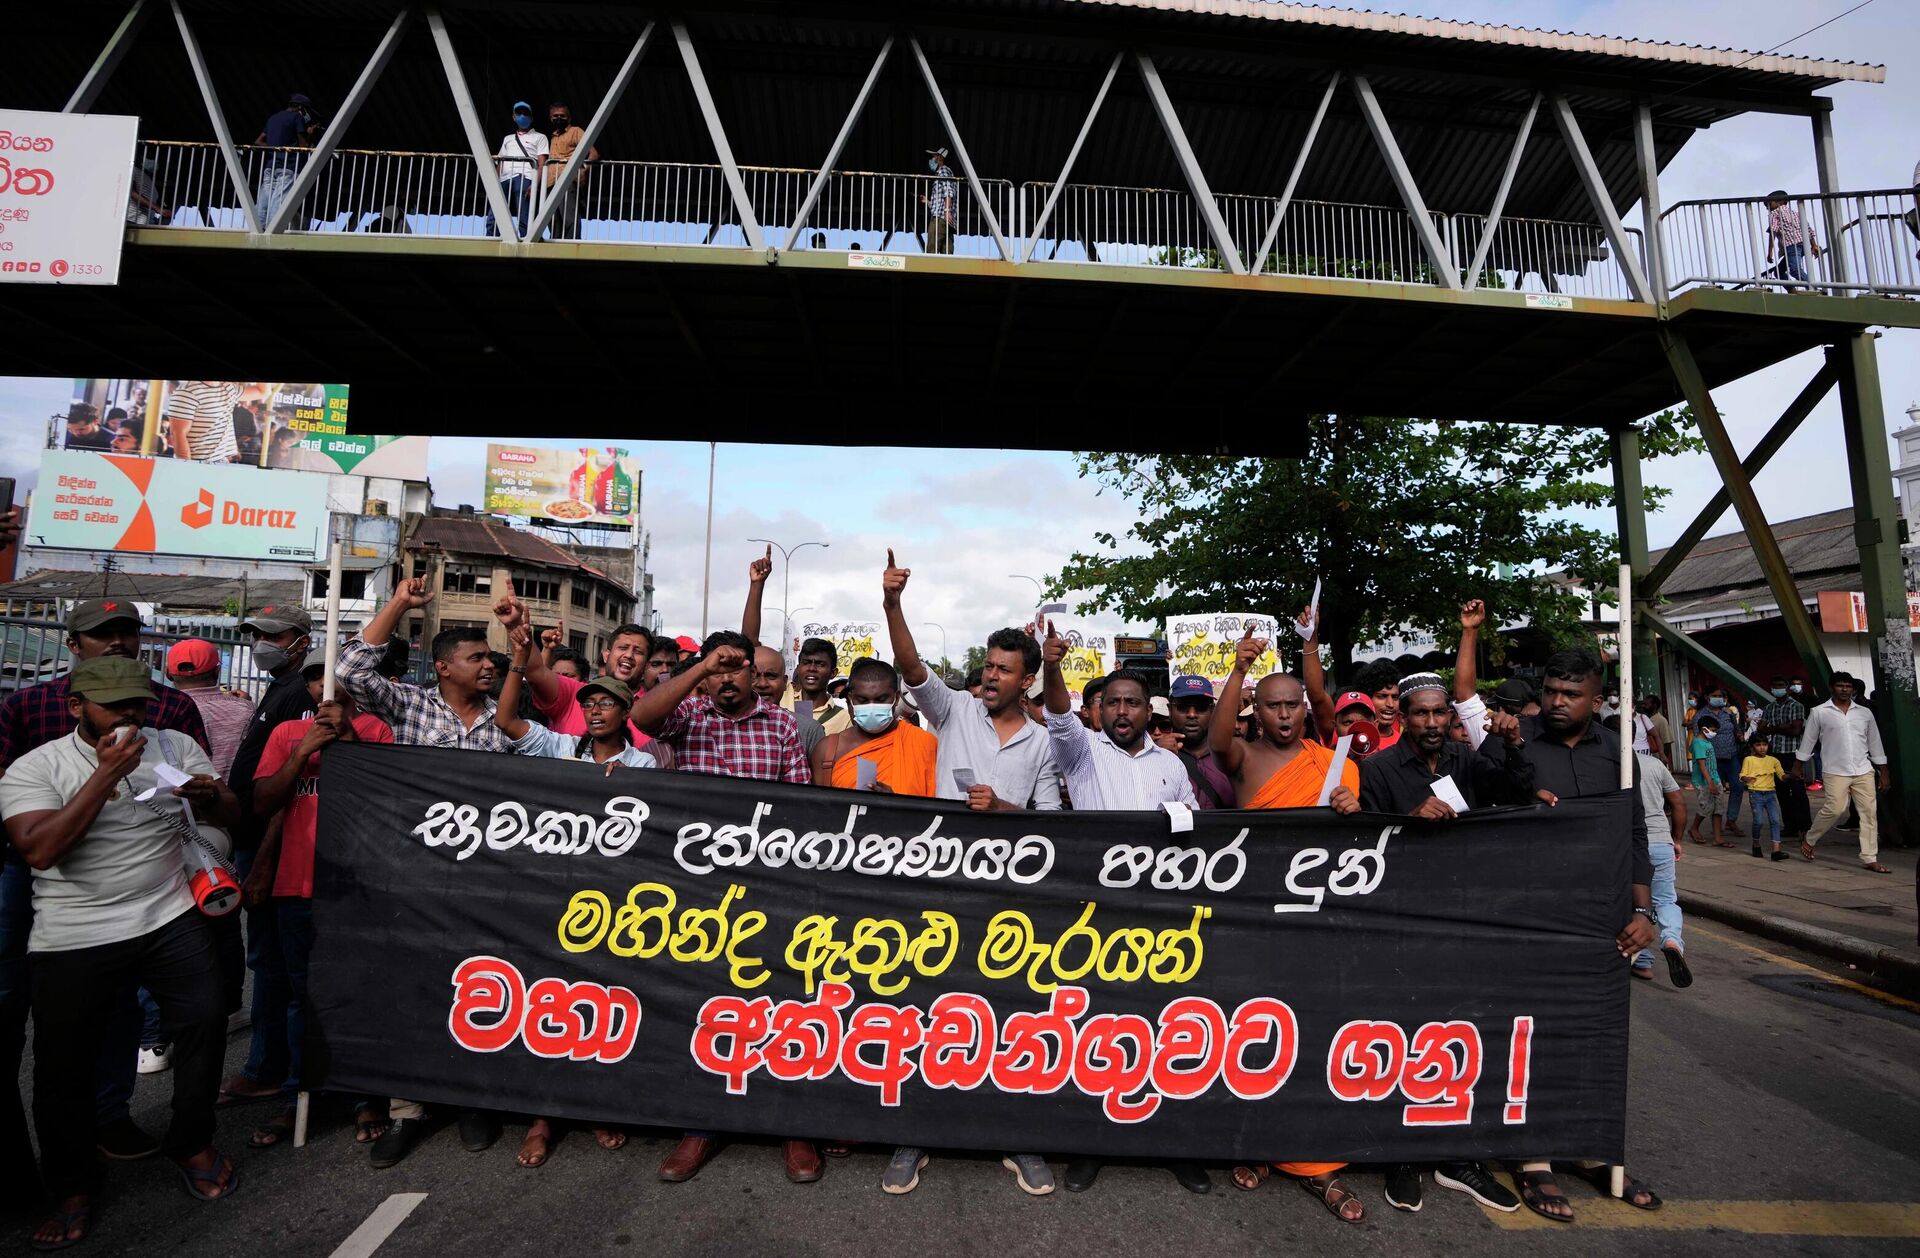 Members of Socialist Youth Union shout slogans and march towards Sri Lanka's police headquarters carrying a banner demanding the arrest of former prime minister Mahinda Rajapkasa for allegedly assaulting anti government protesters in Colombo, Sri Lanka, Monday, May 16, 2022 - Sputnik International, 1920, 17.05.2022